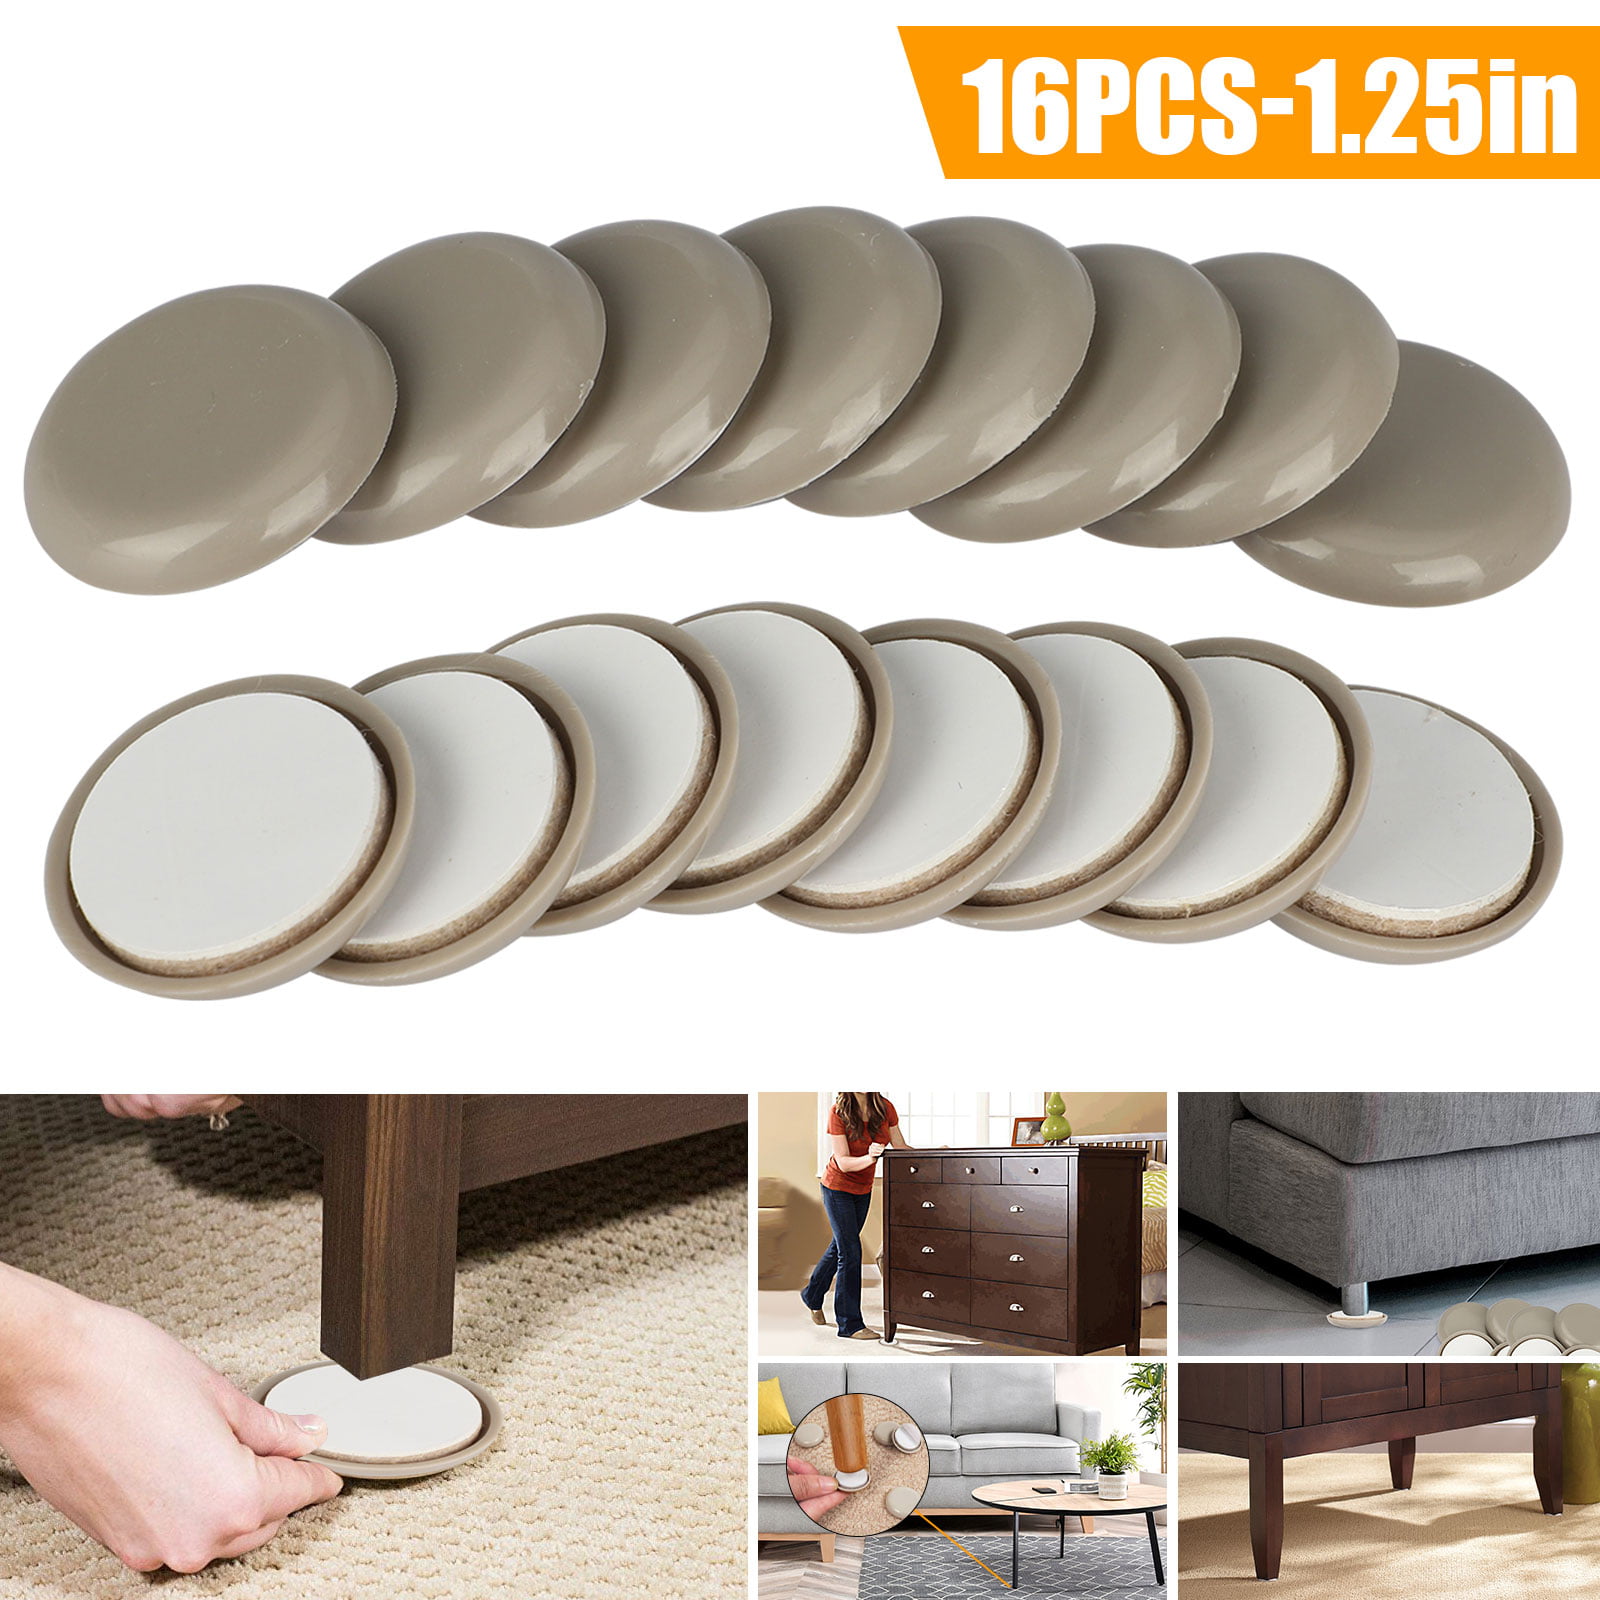 for Carpeted and Hard Floor Surfaces Felt Pads Suitable for All The Furnitures Furniture Moving Kit of Brown （8 Pieces for Carpet ，8 Pieces for Hard Surfaces） 3.5 inches Furniture Sliders